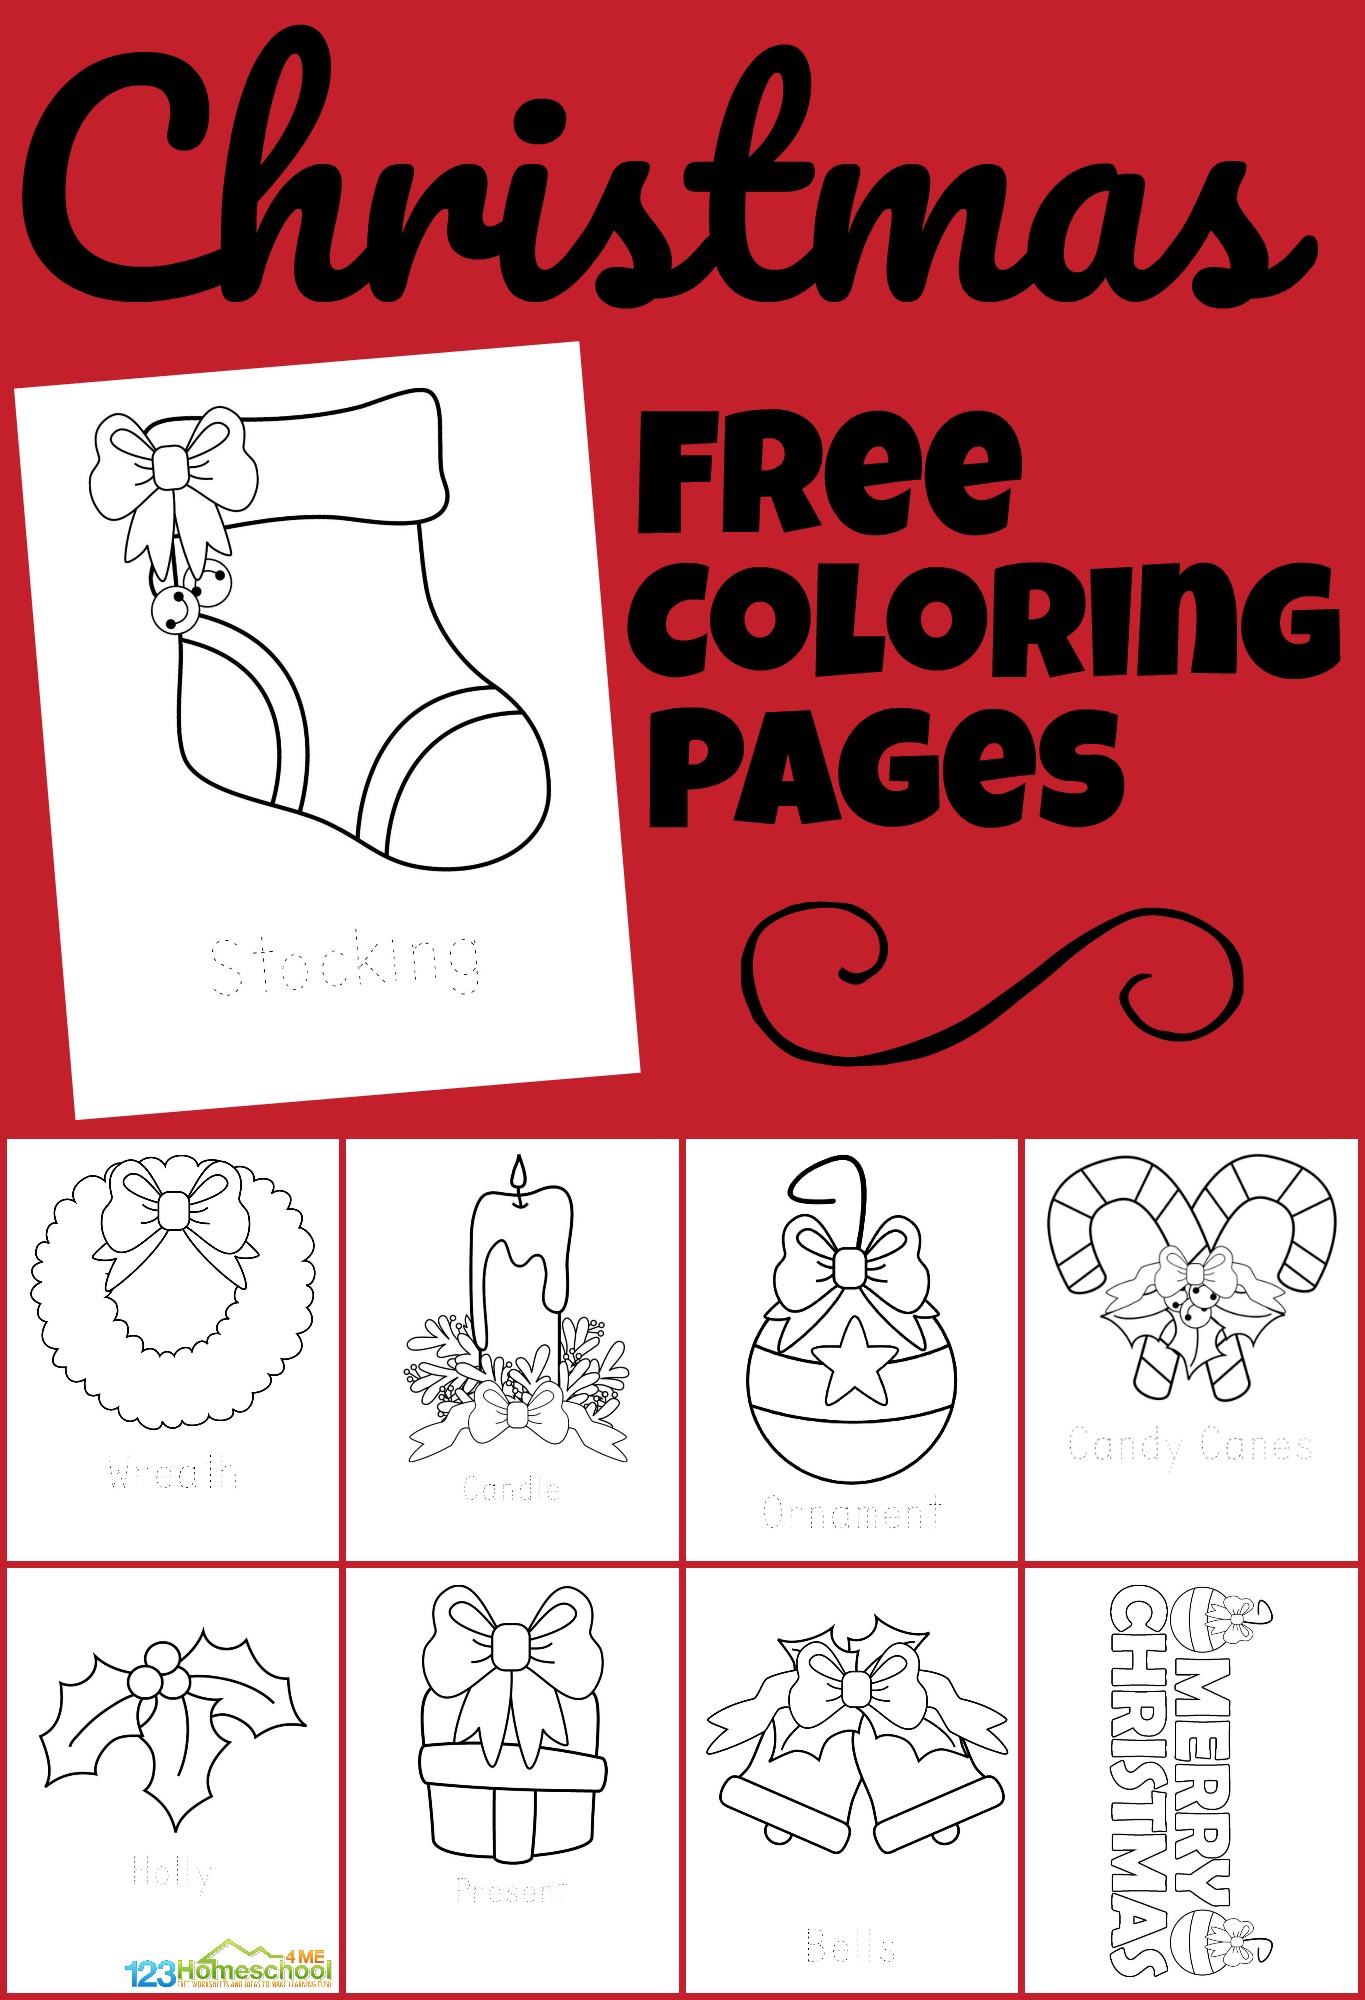 Ð free christmas coloring pages